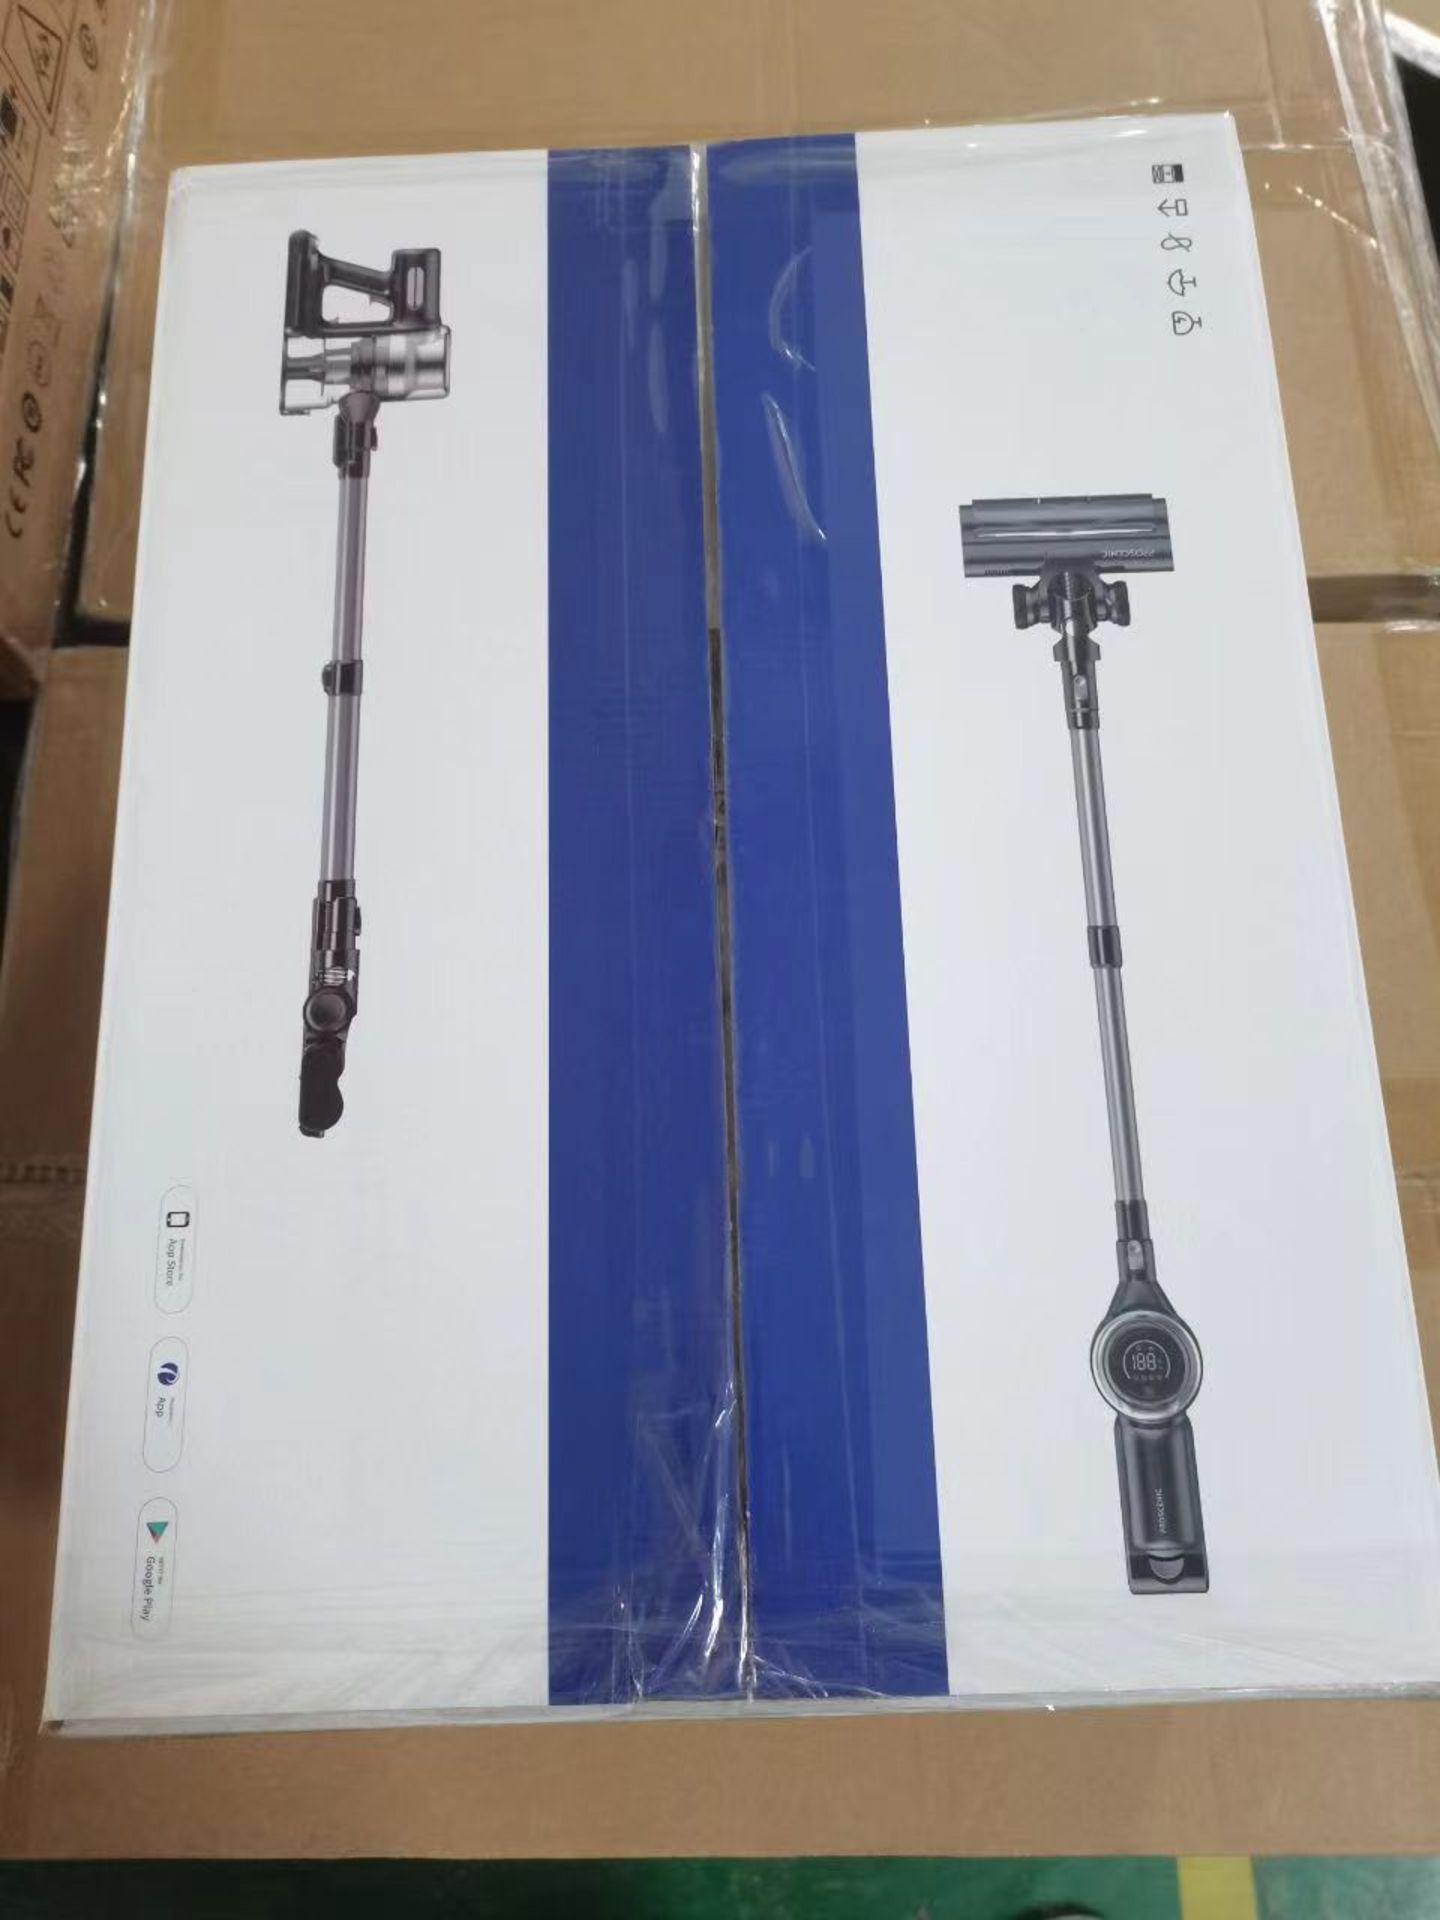 New & Boxed Proscenic P12 Cordless Vacuum Cleaner, 33Kpa Stick Vacuum Cleaner with Touch Display, - Image 6 of 11